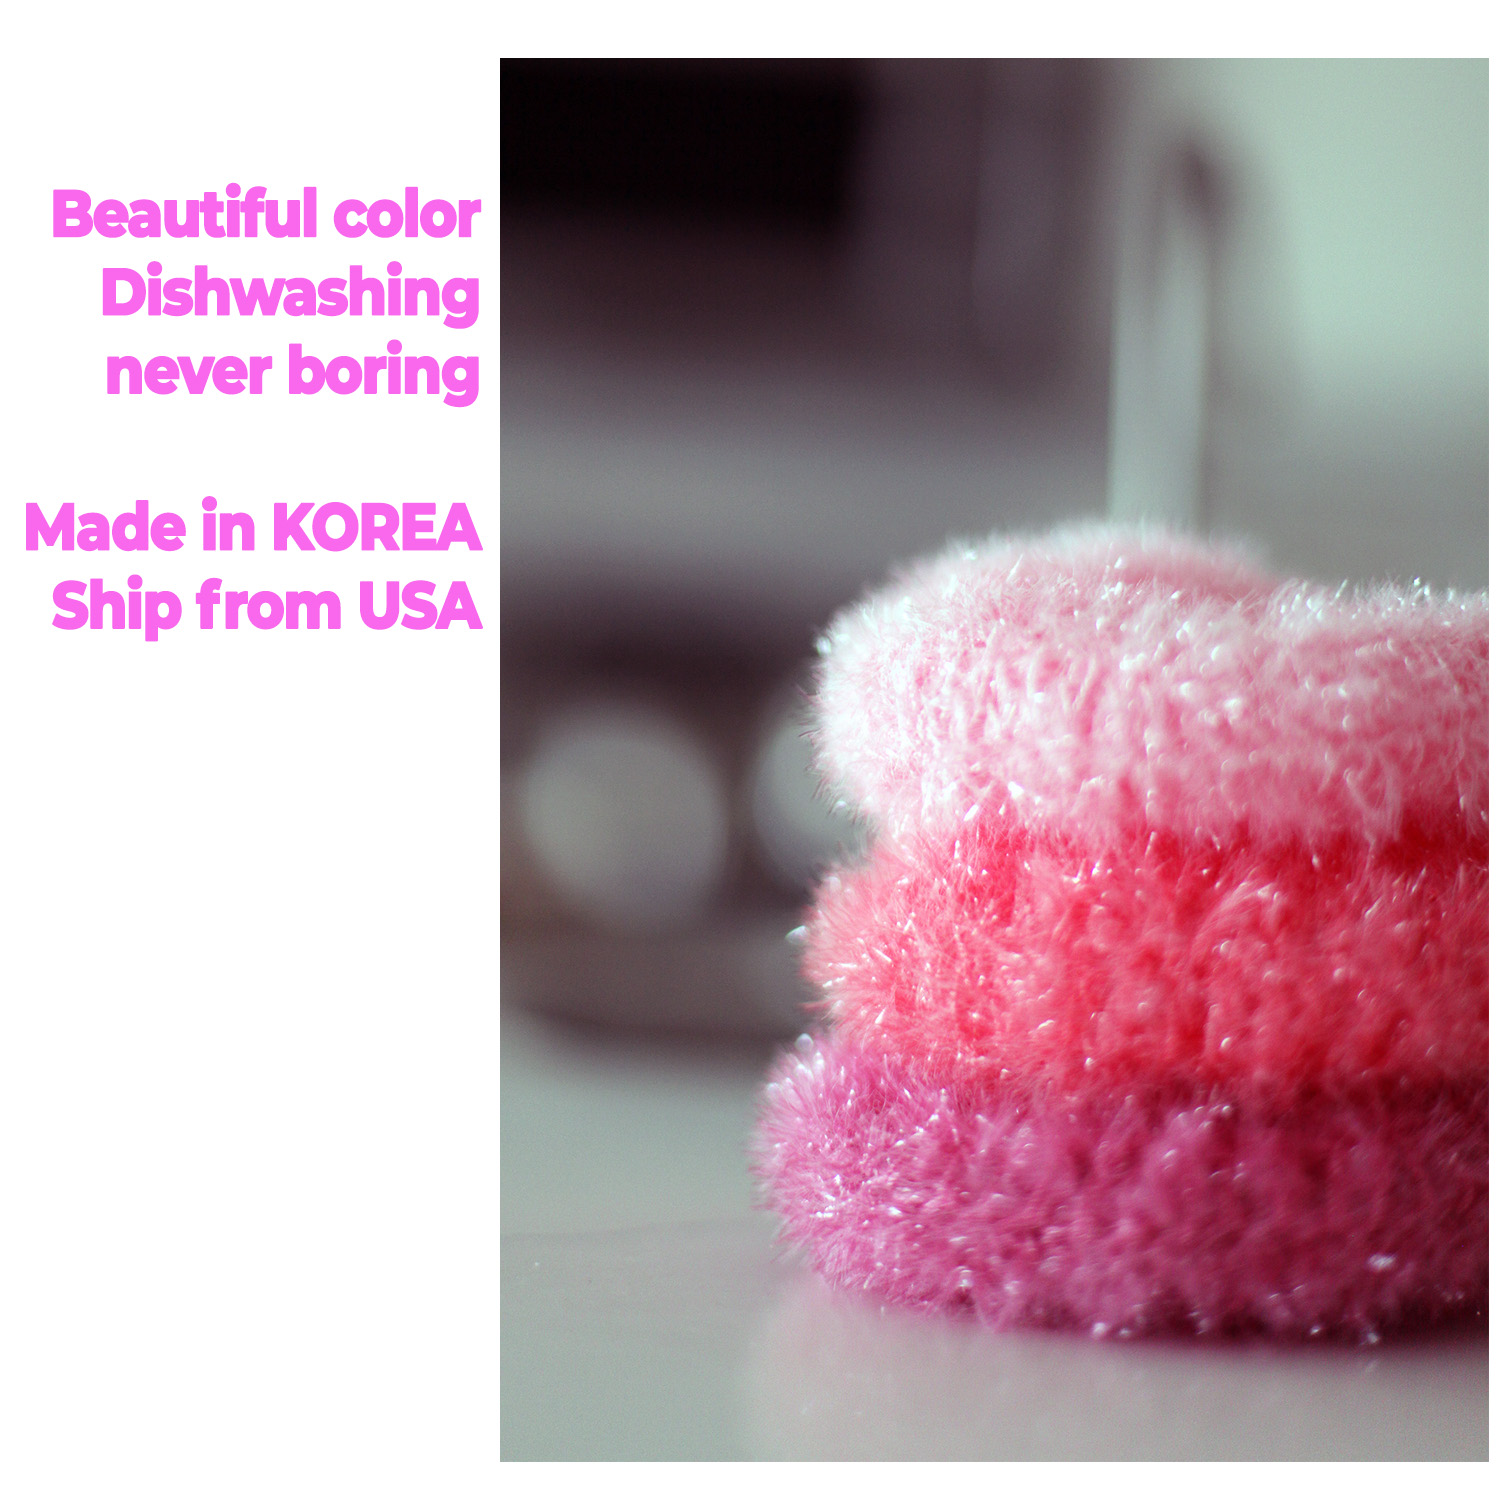 General Use Bathrooms Dish Scrubbie Strawberry Floors Scrubbers 1Pc | Cute and Colorful Scrubber for All Purpose Scrubbing Dishwashing 